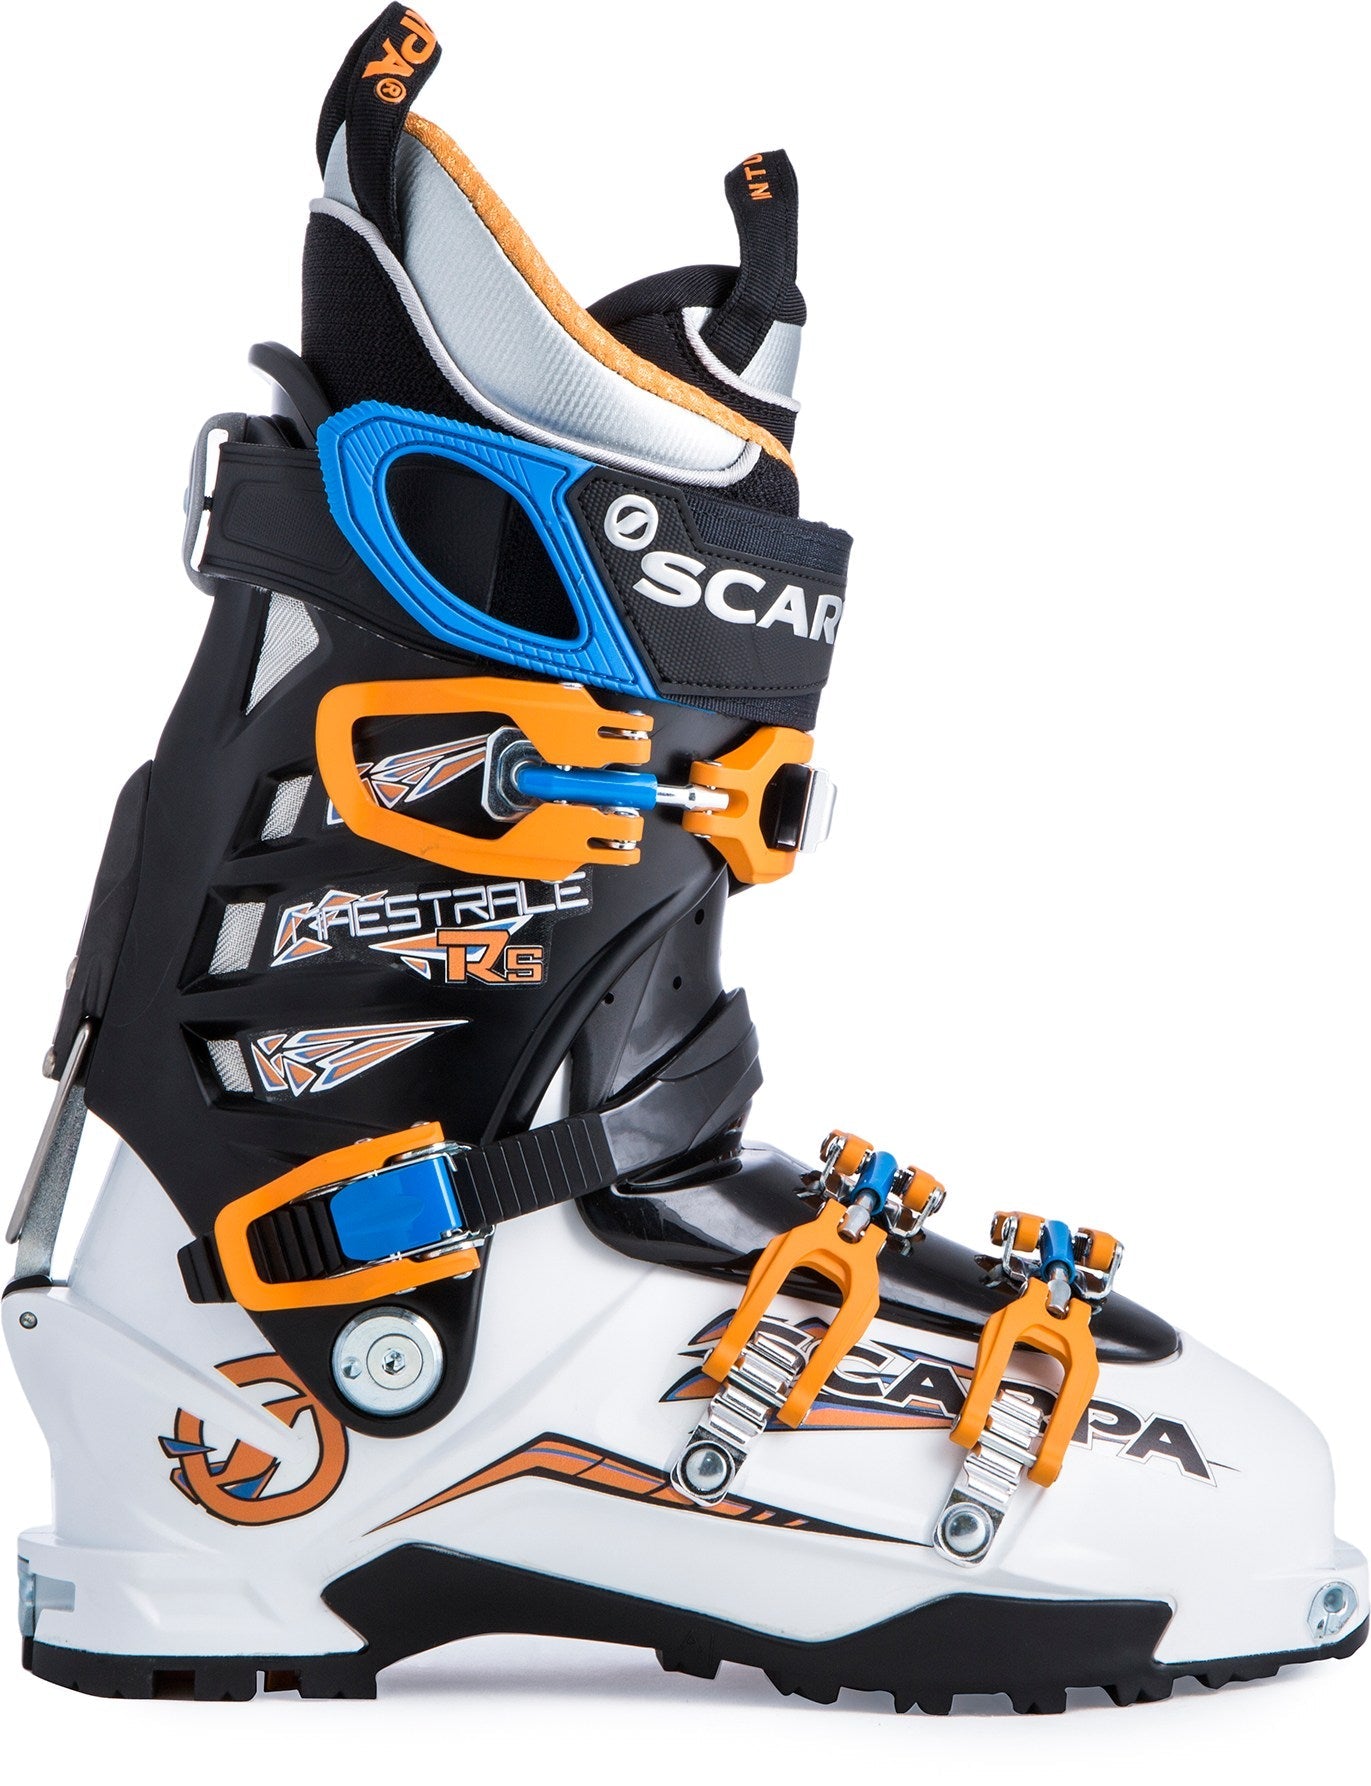 Gear Review: Scarpa Maestrale RS Ski Boots - Next Adventure